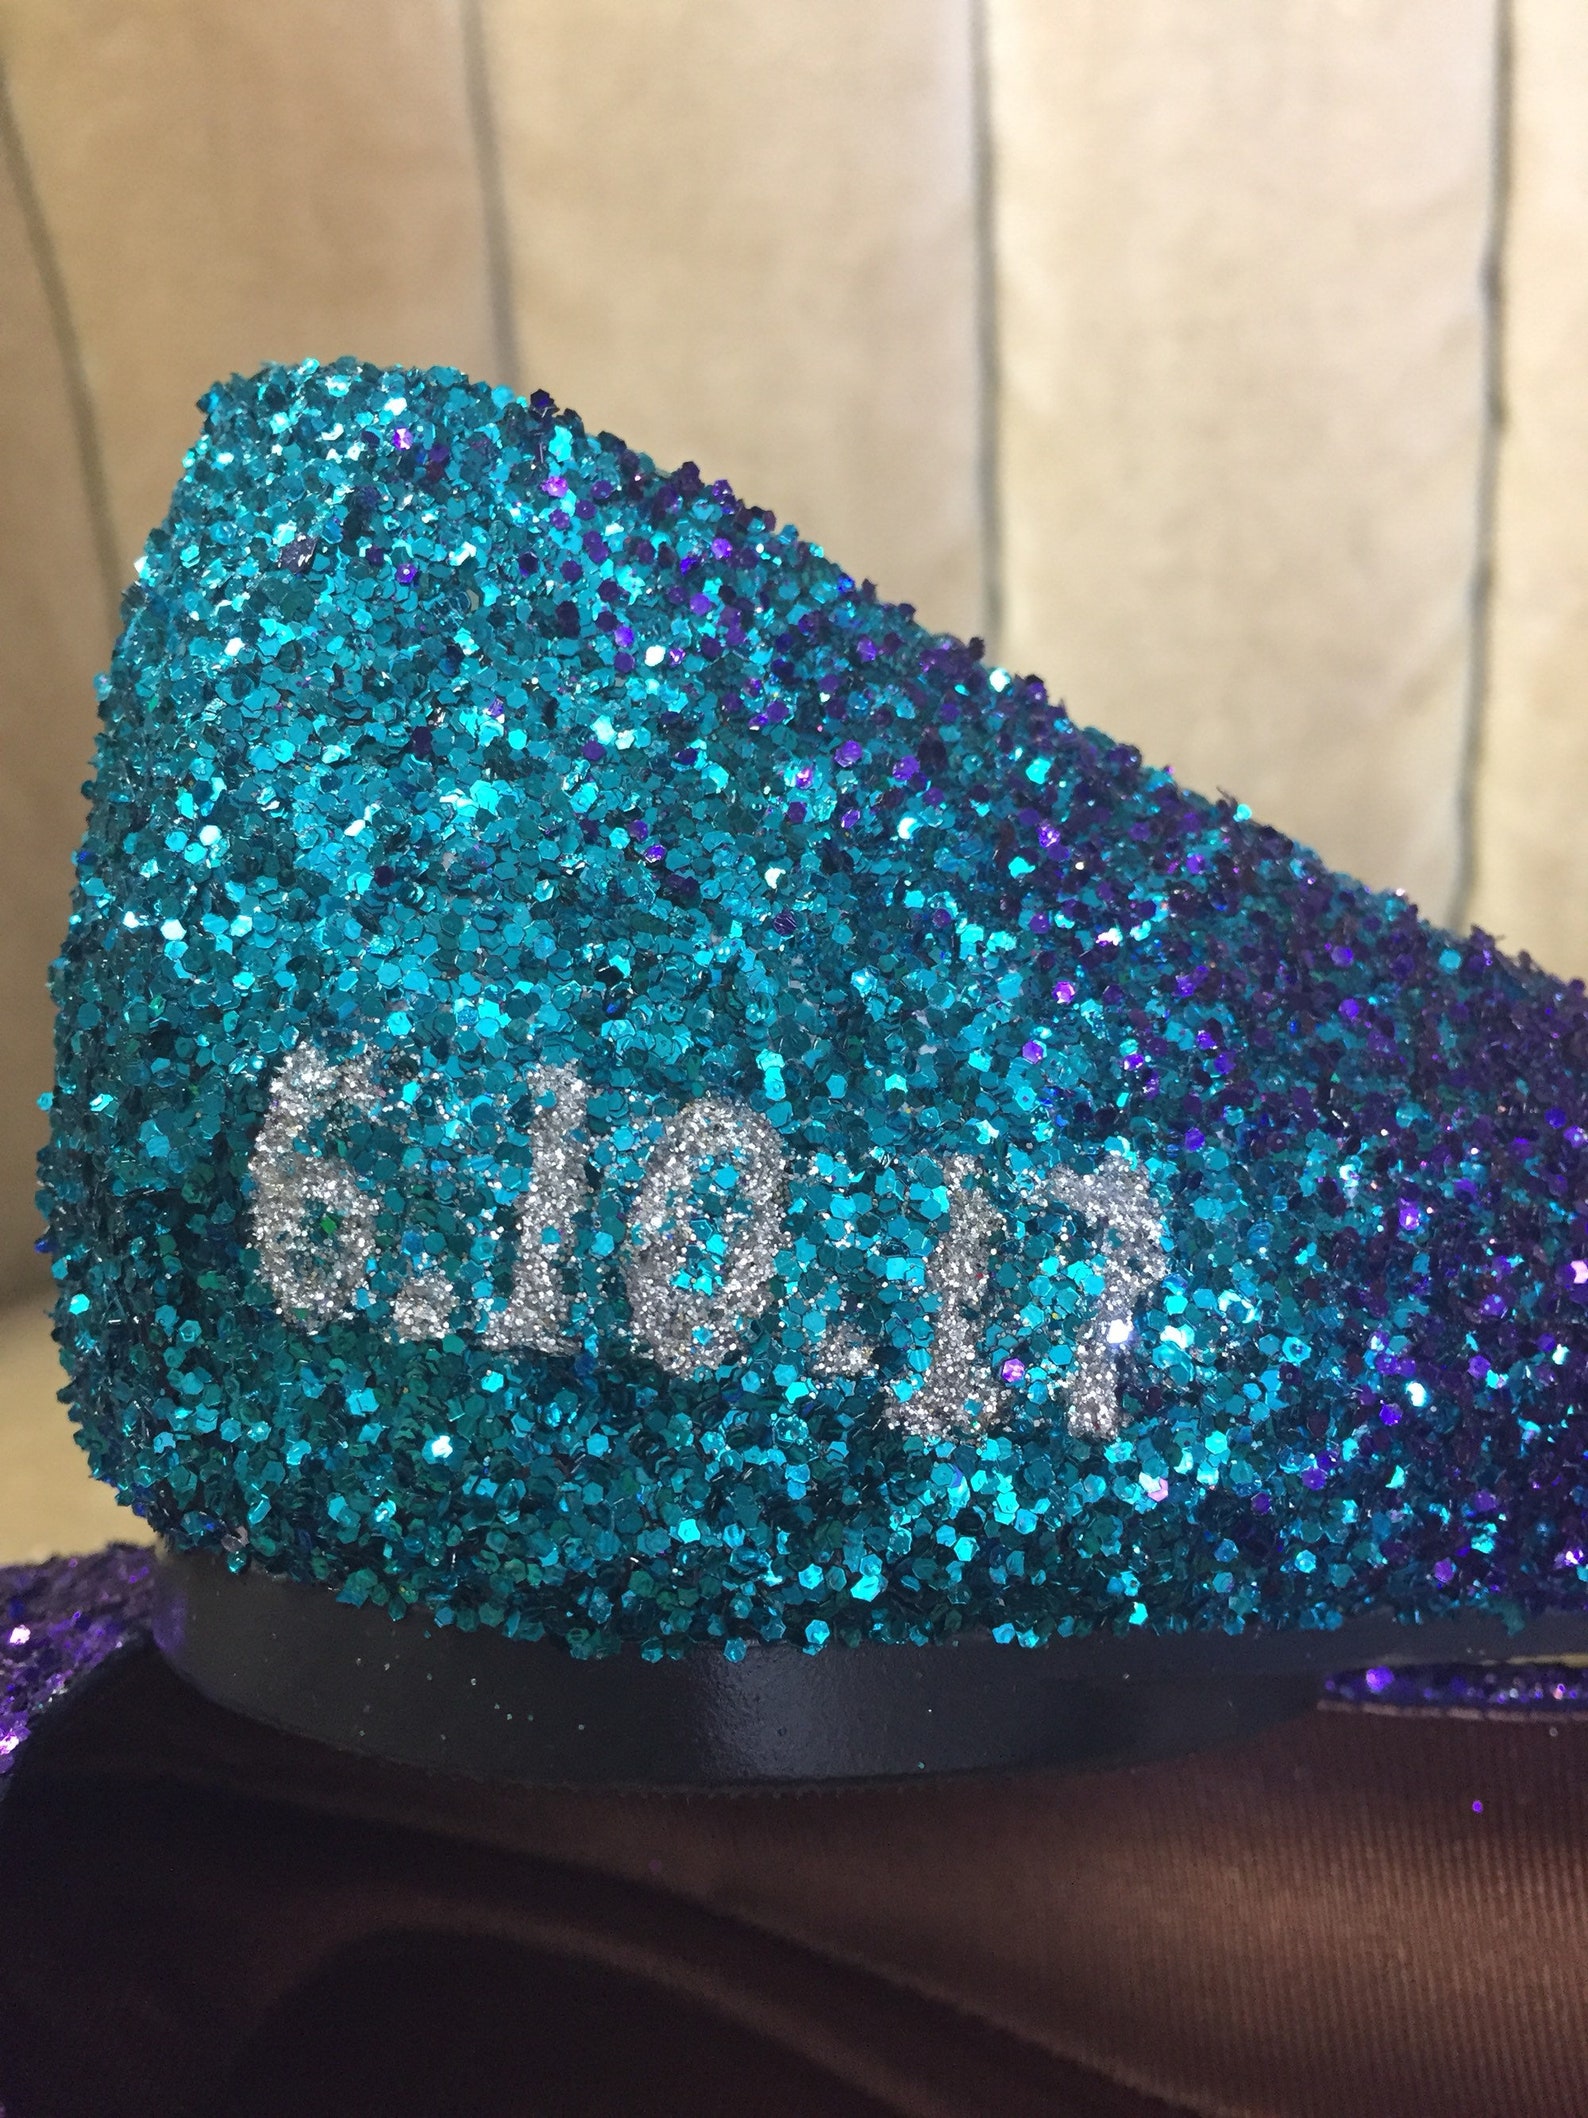 personalized ombre ballet flats. teal to purple ombre.